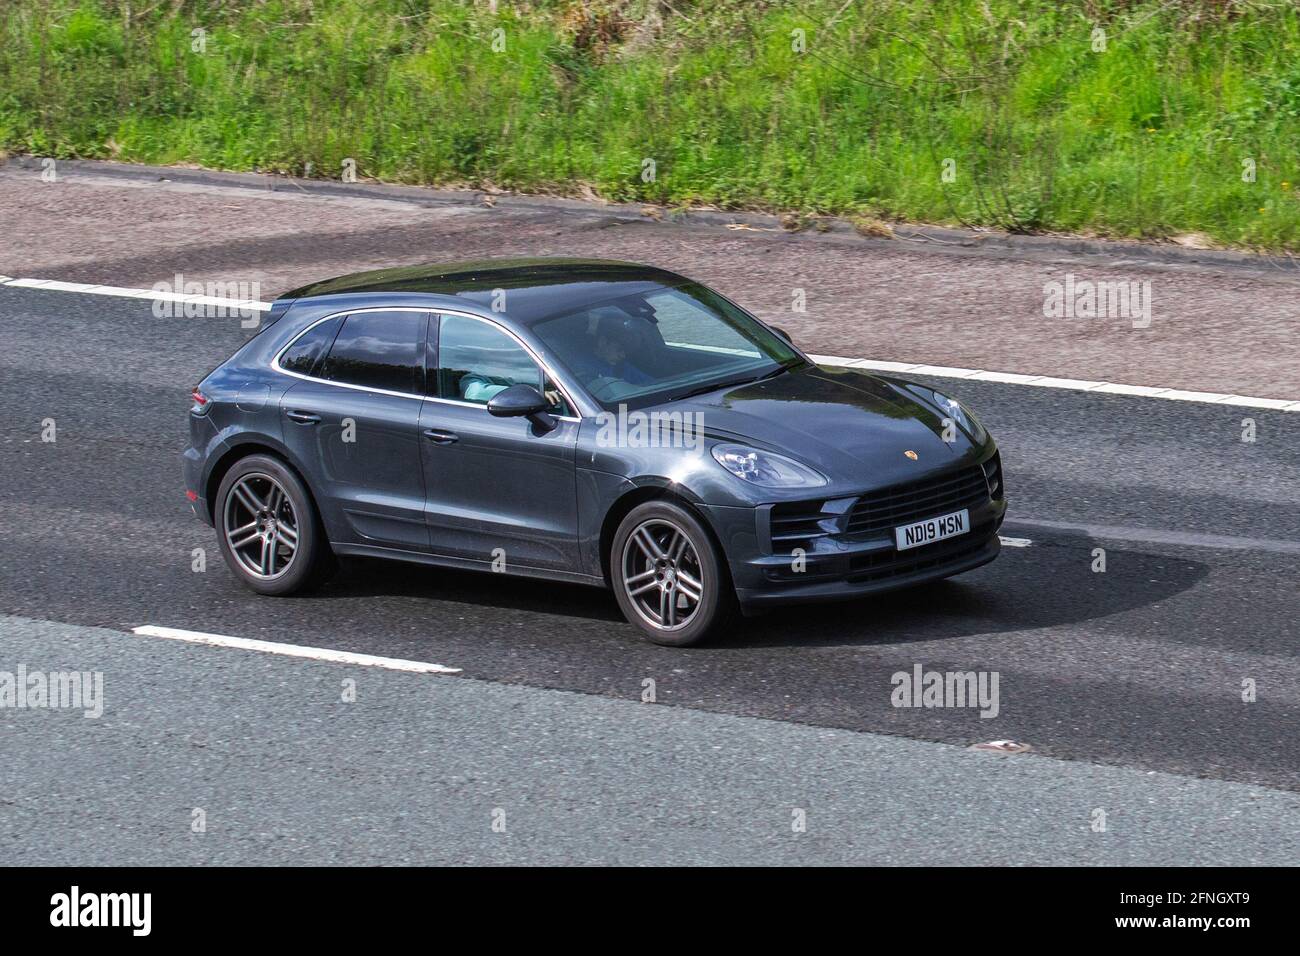 2019 grey Porsche Macan S S-A 2995cc petrol SUV ; Vehicular traffic, moving vehicles, cars, vehicle driving on UK roads, motors, motoring on the M6 motorway highway UK road network. Stock Photo